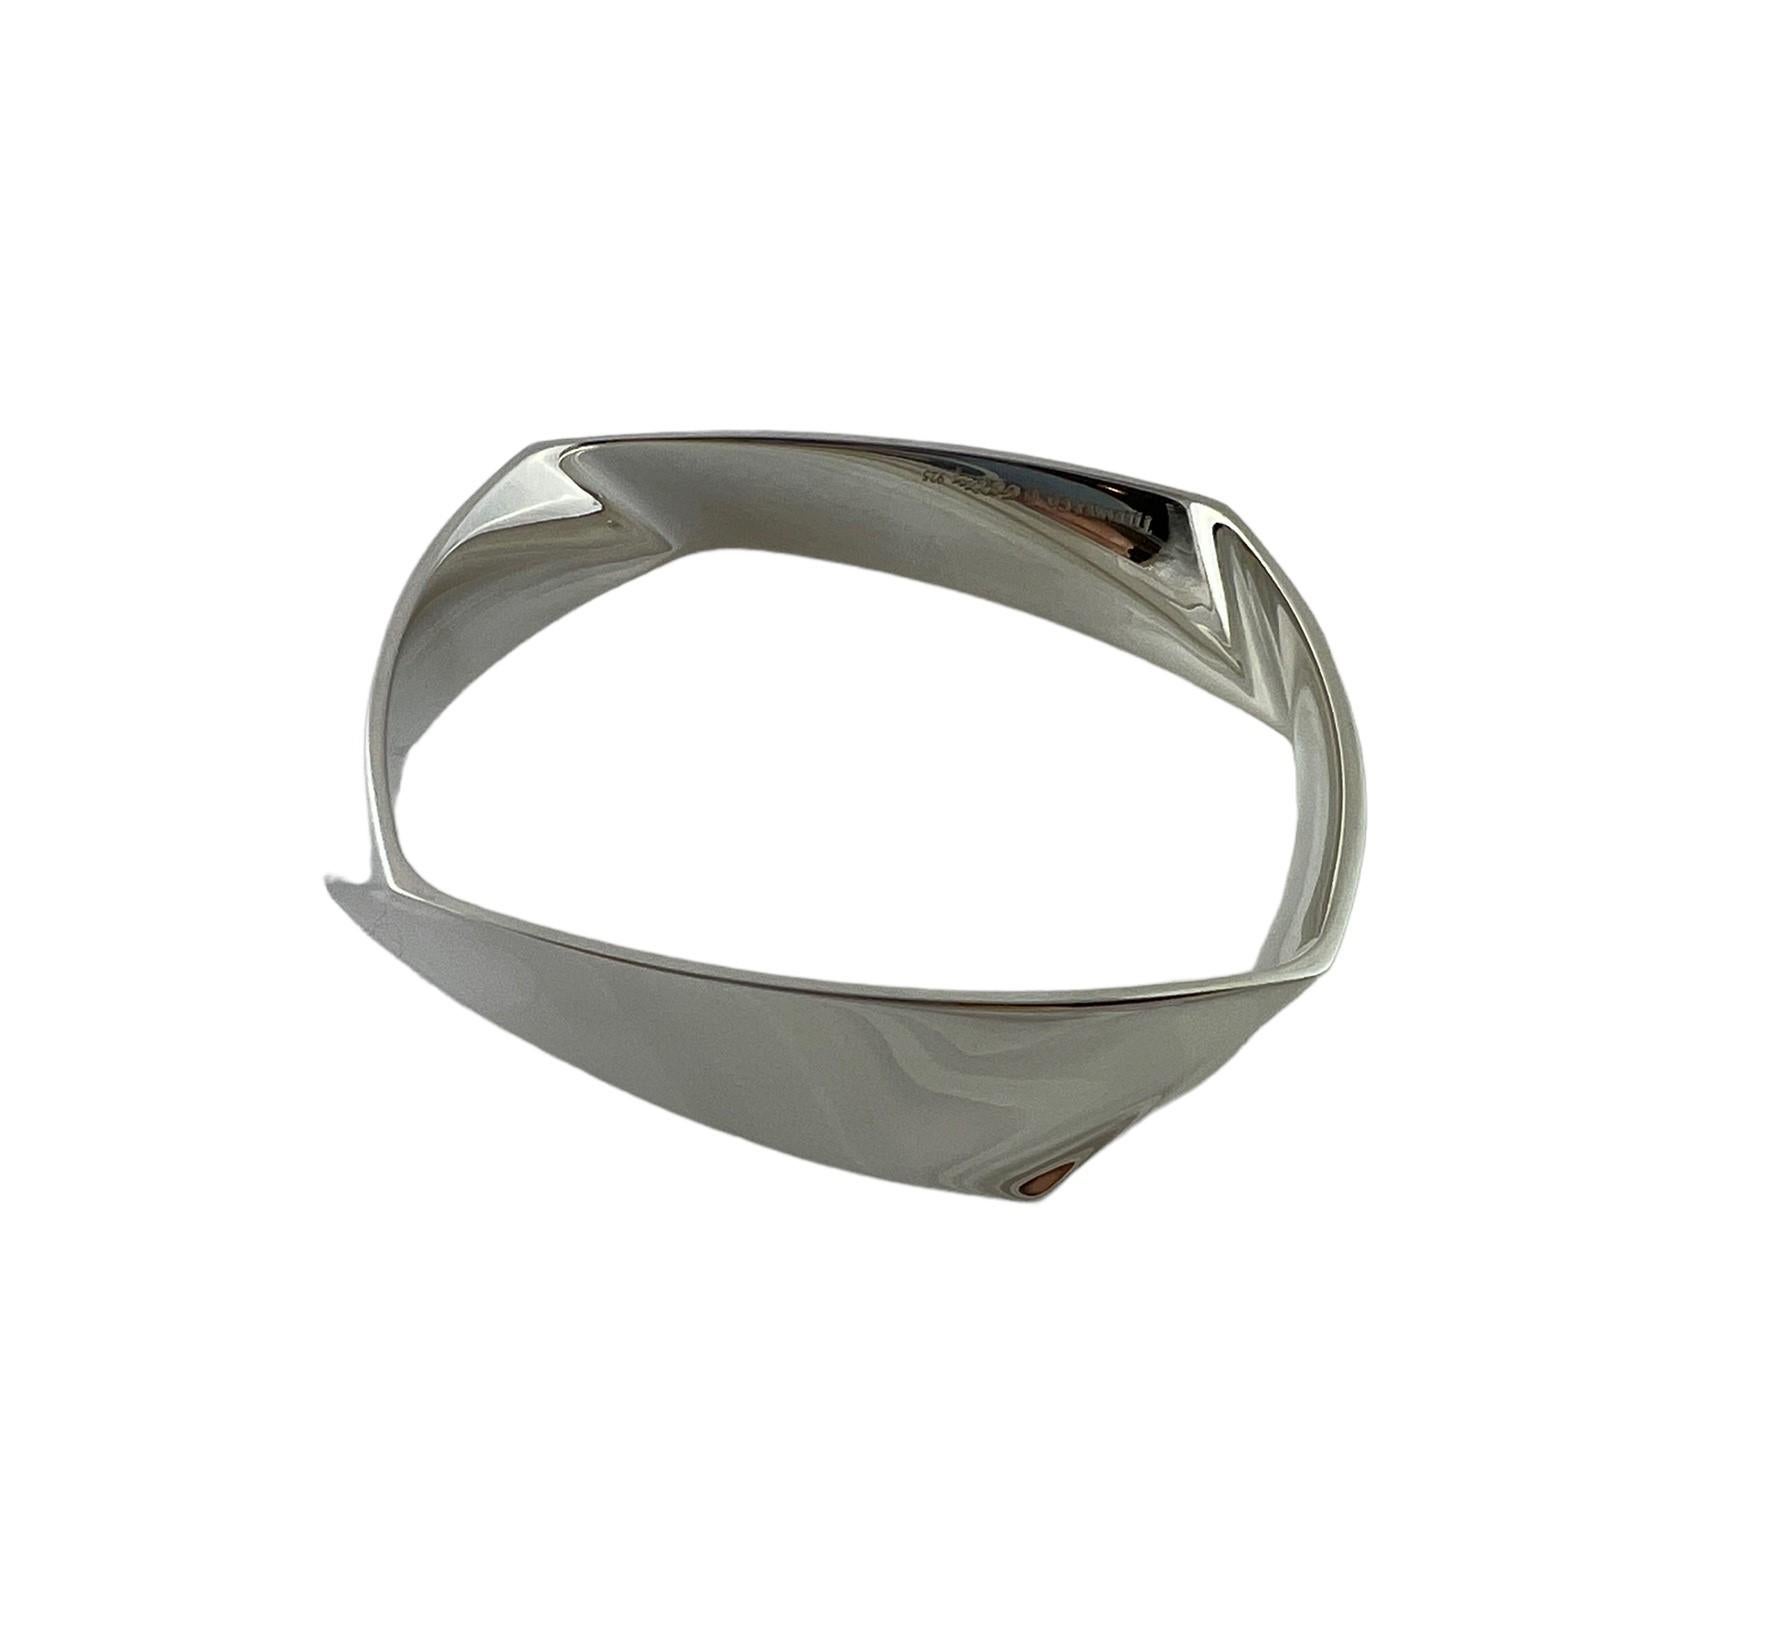 Tiffany & Co. Frank Gehry Sterling Silver Torque Bracelet



This beautiful abstract bangle bracelet designed by Frank Gehry for Tiffany & Co. is set in sterling silver.



Bangle is square in shape and approx. 7 3/4